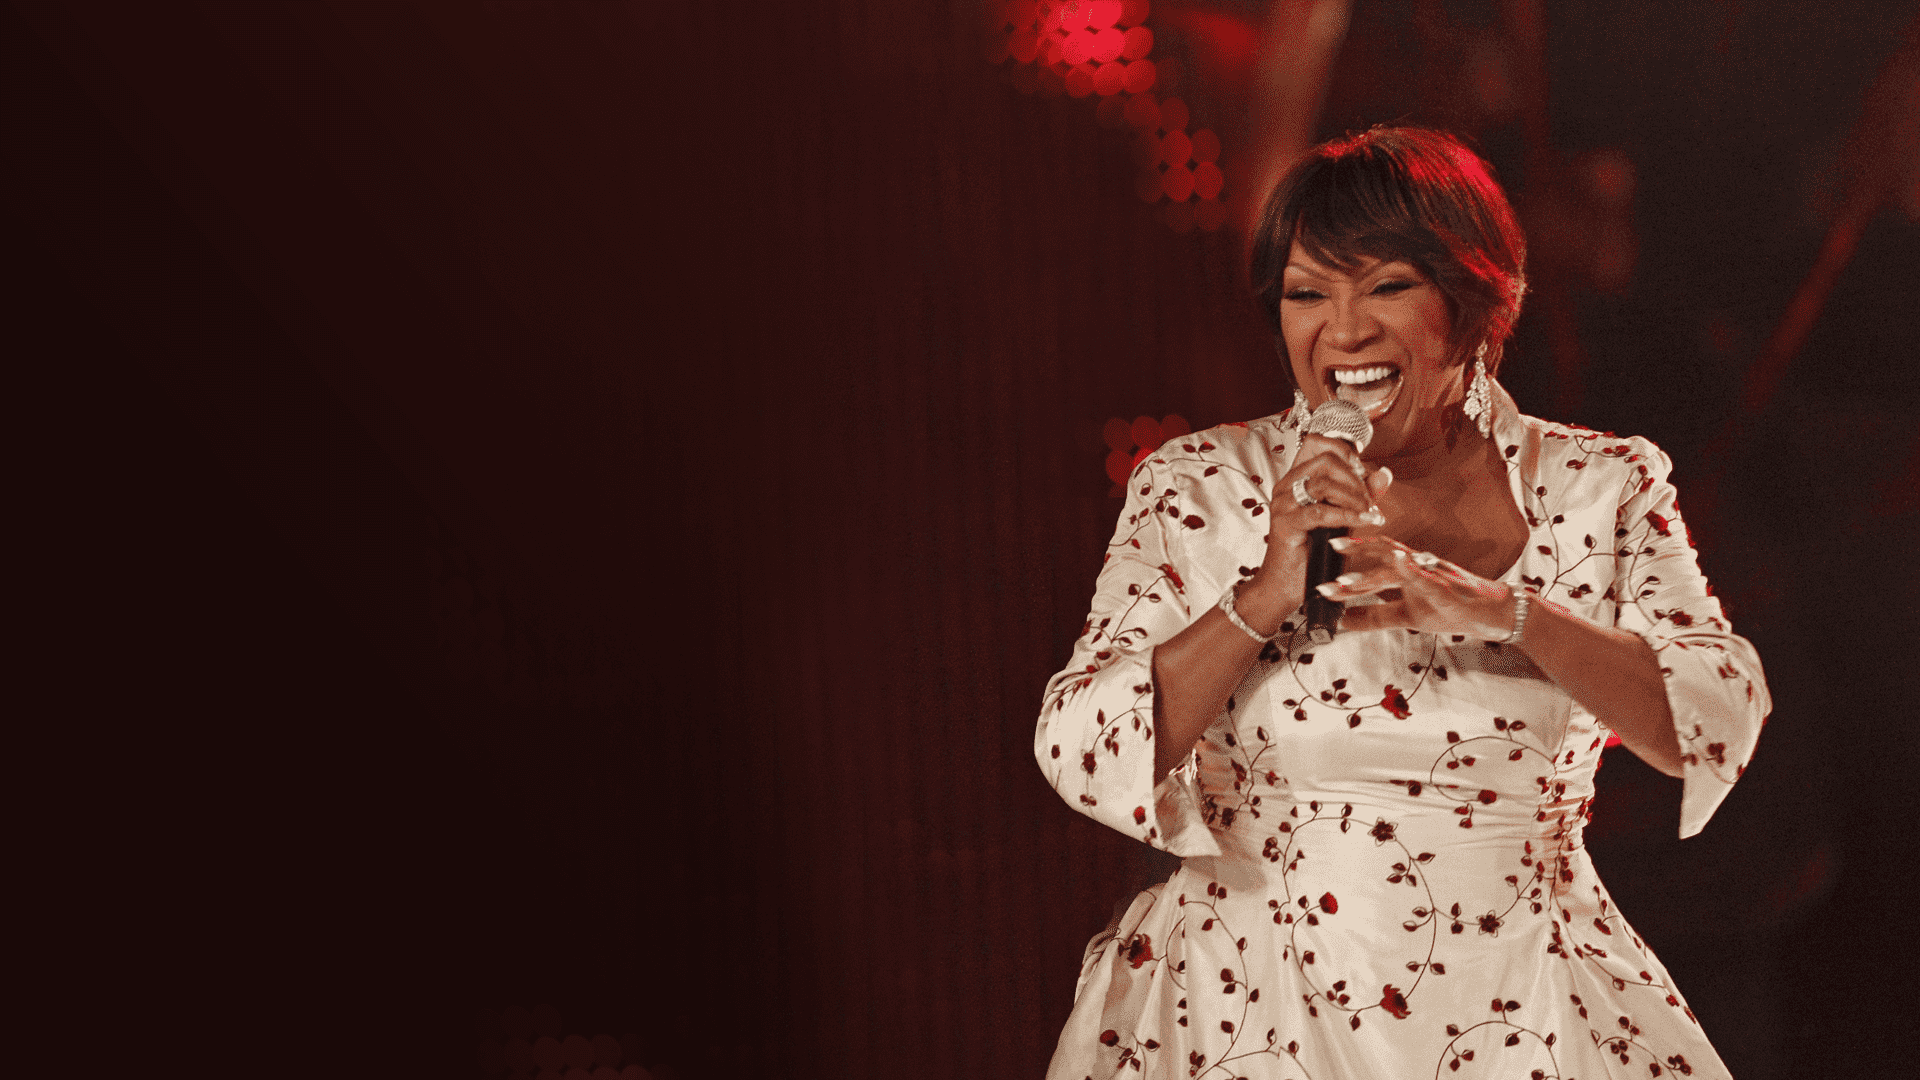 Patti Labelle Patti Labelle Performs Lady Marmalade at the World Music Awards